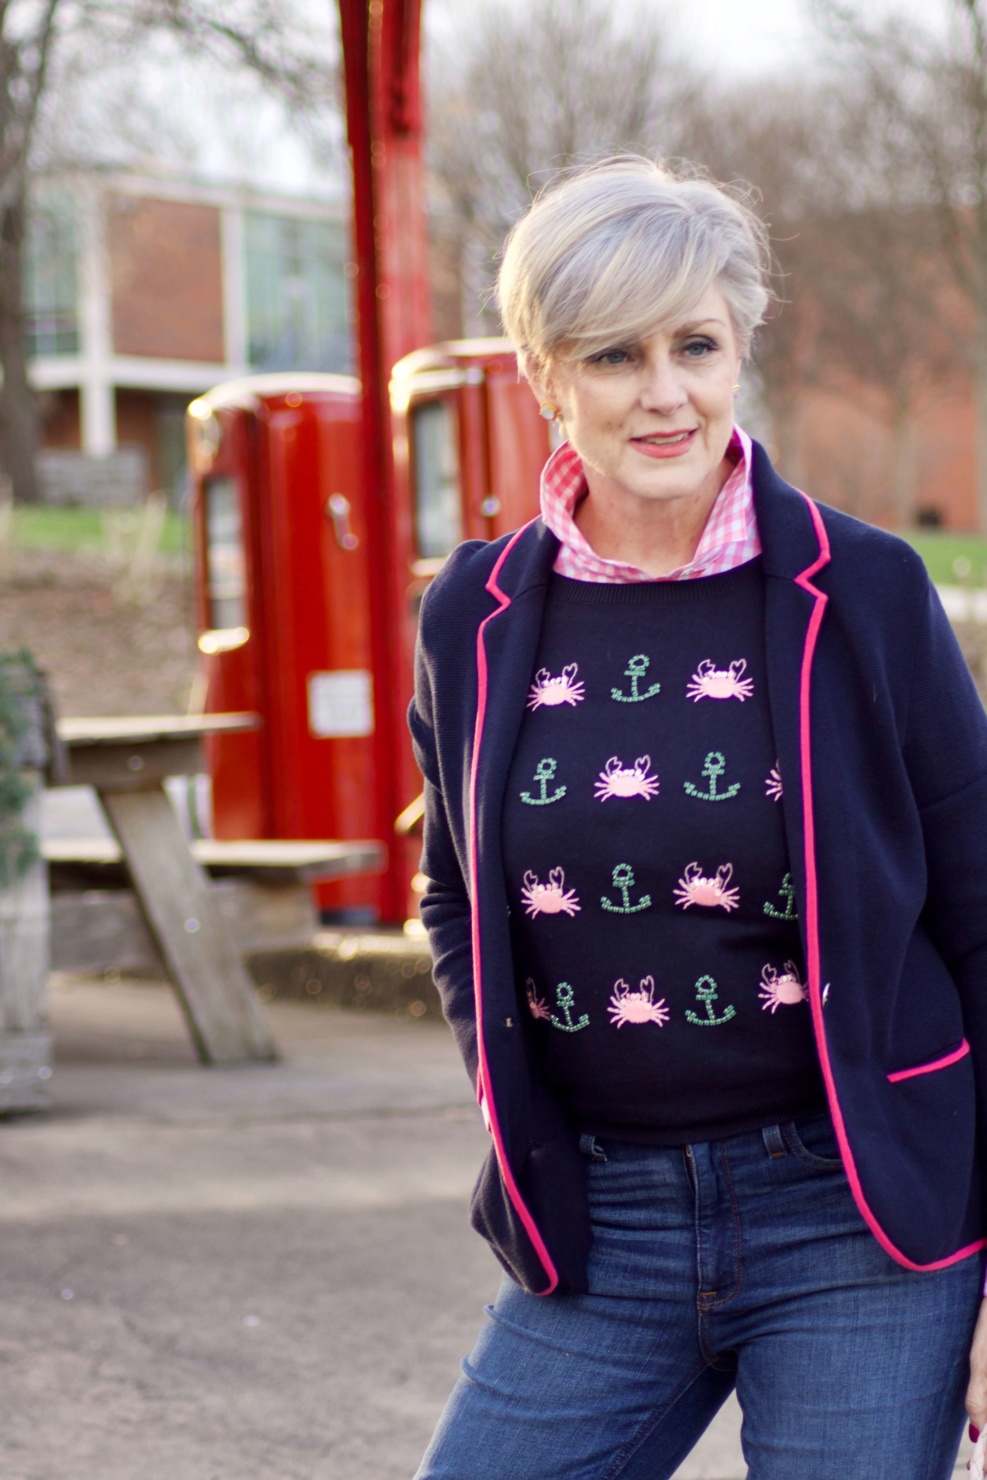 beth from Style at a Certain Age wears a puffer jacket, navy blue knit blazer, novelty sweater, pink gingham check shirt and blue jeans